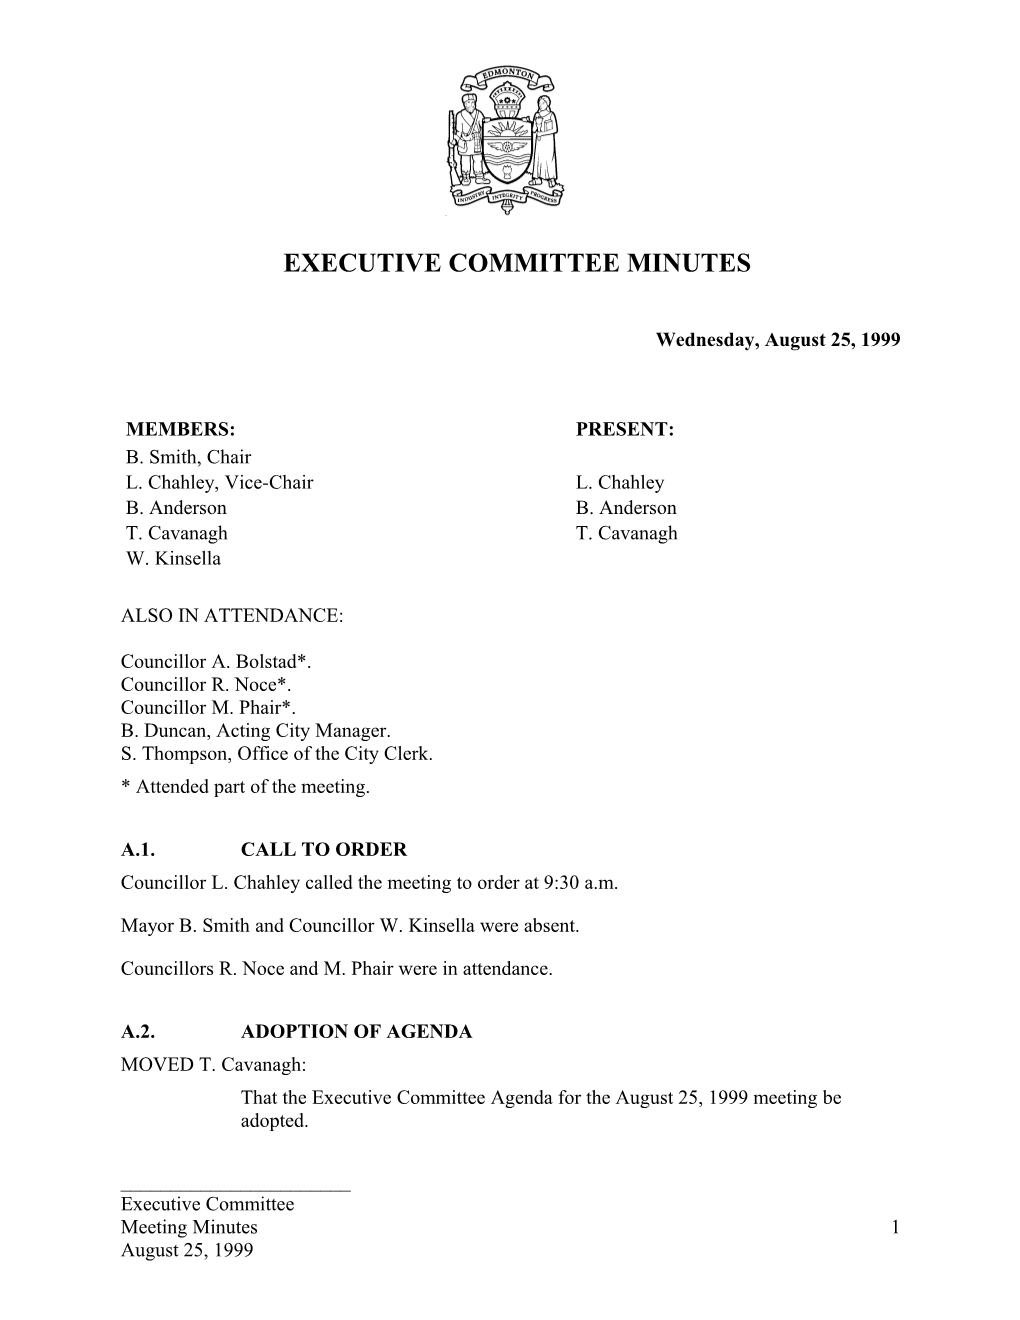 Minutes for Executive Committee August 25, 1999 Meeting